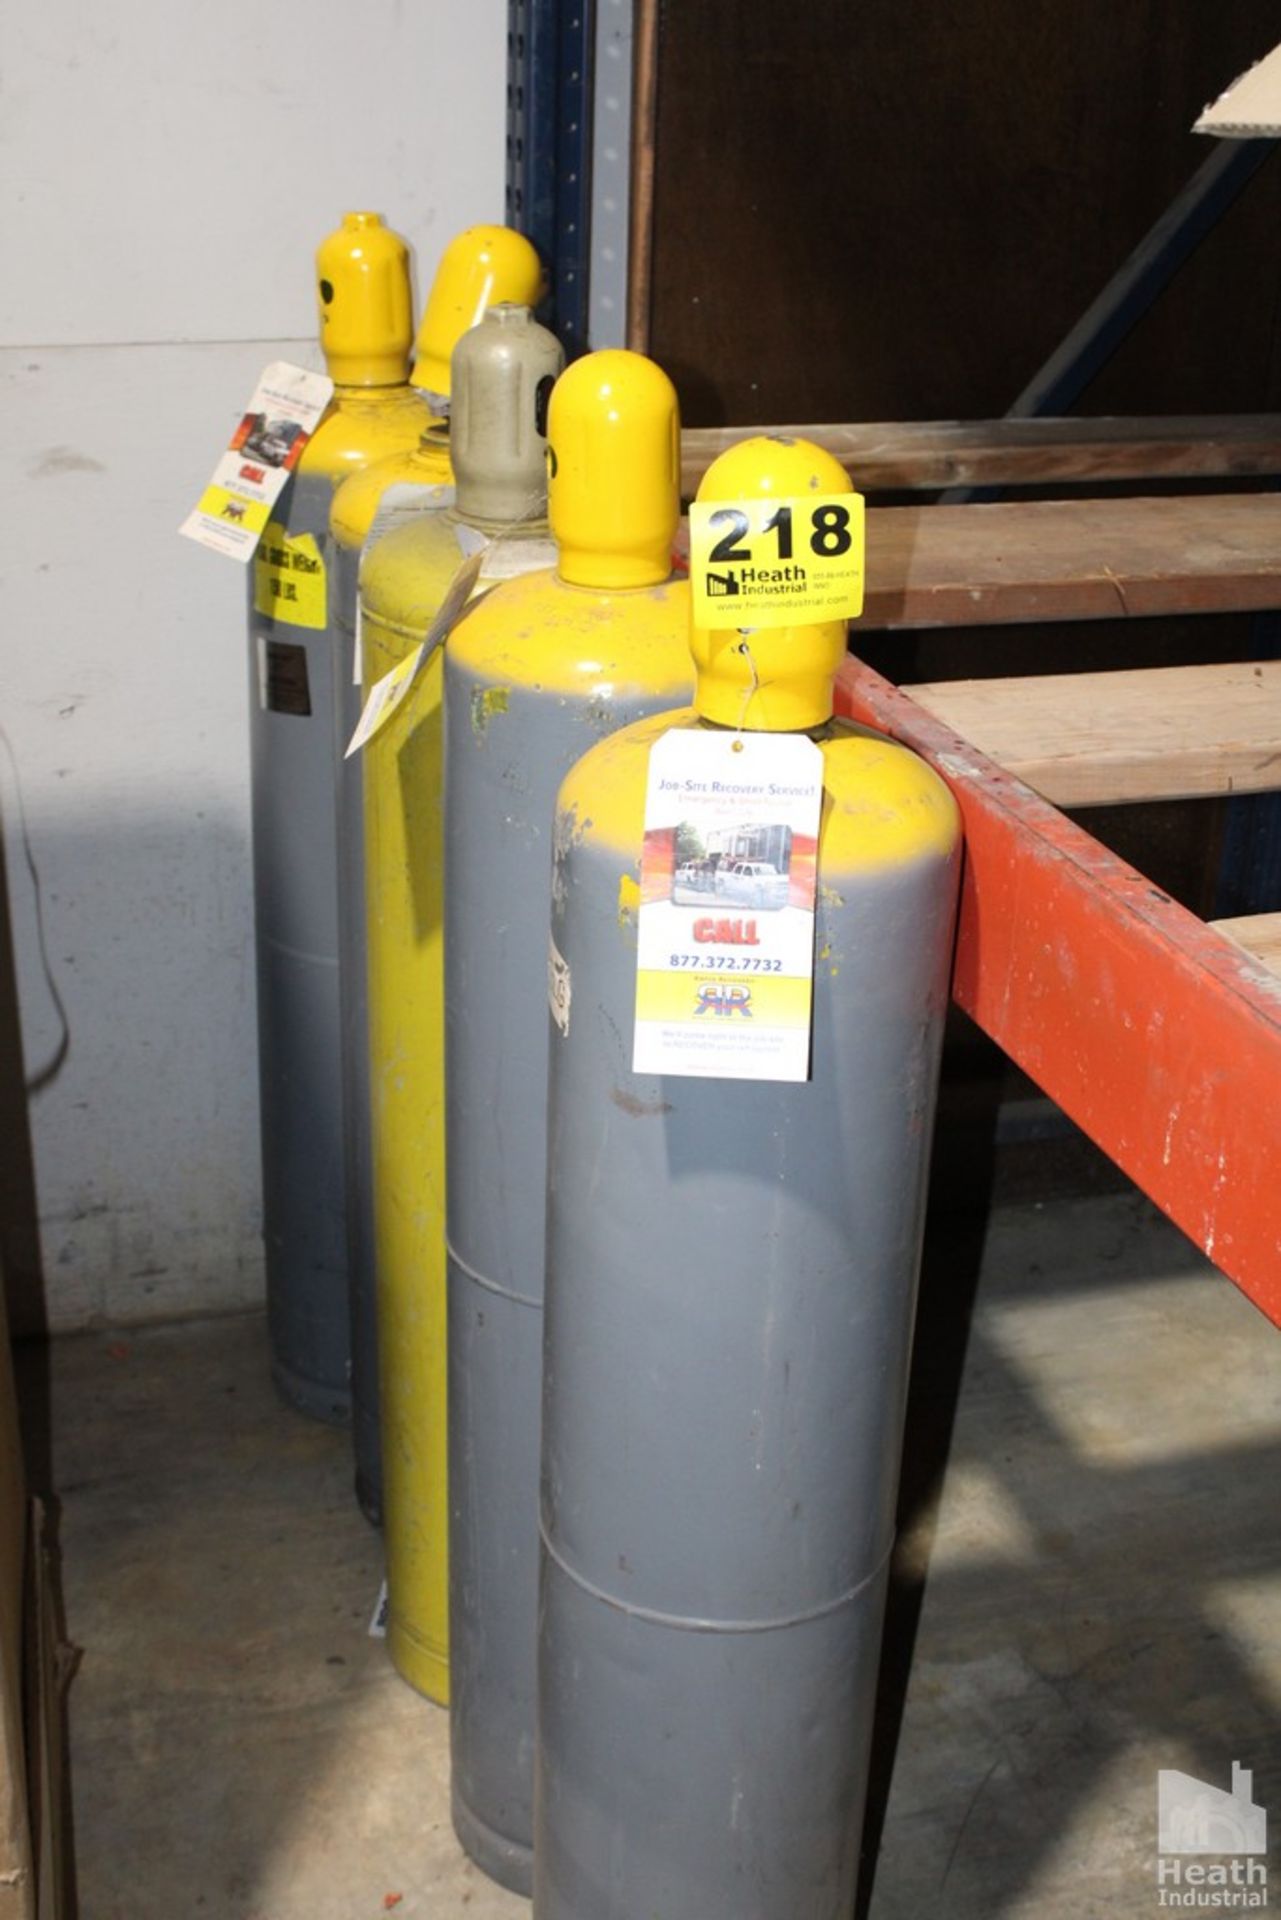 (5) COMPRESSED GAS CYLINDERS